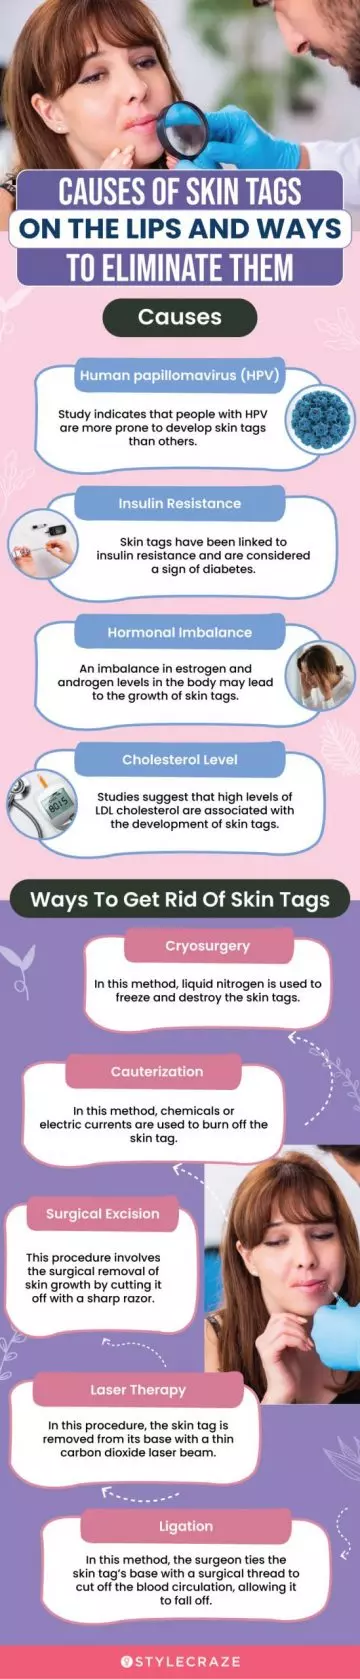 causes of skin tags on the lips and ways to eliminate them (infographic)